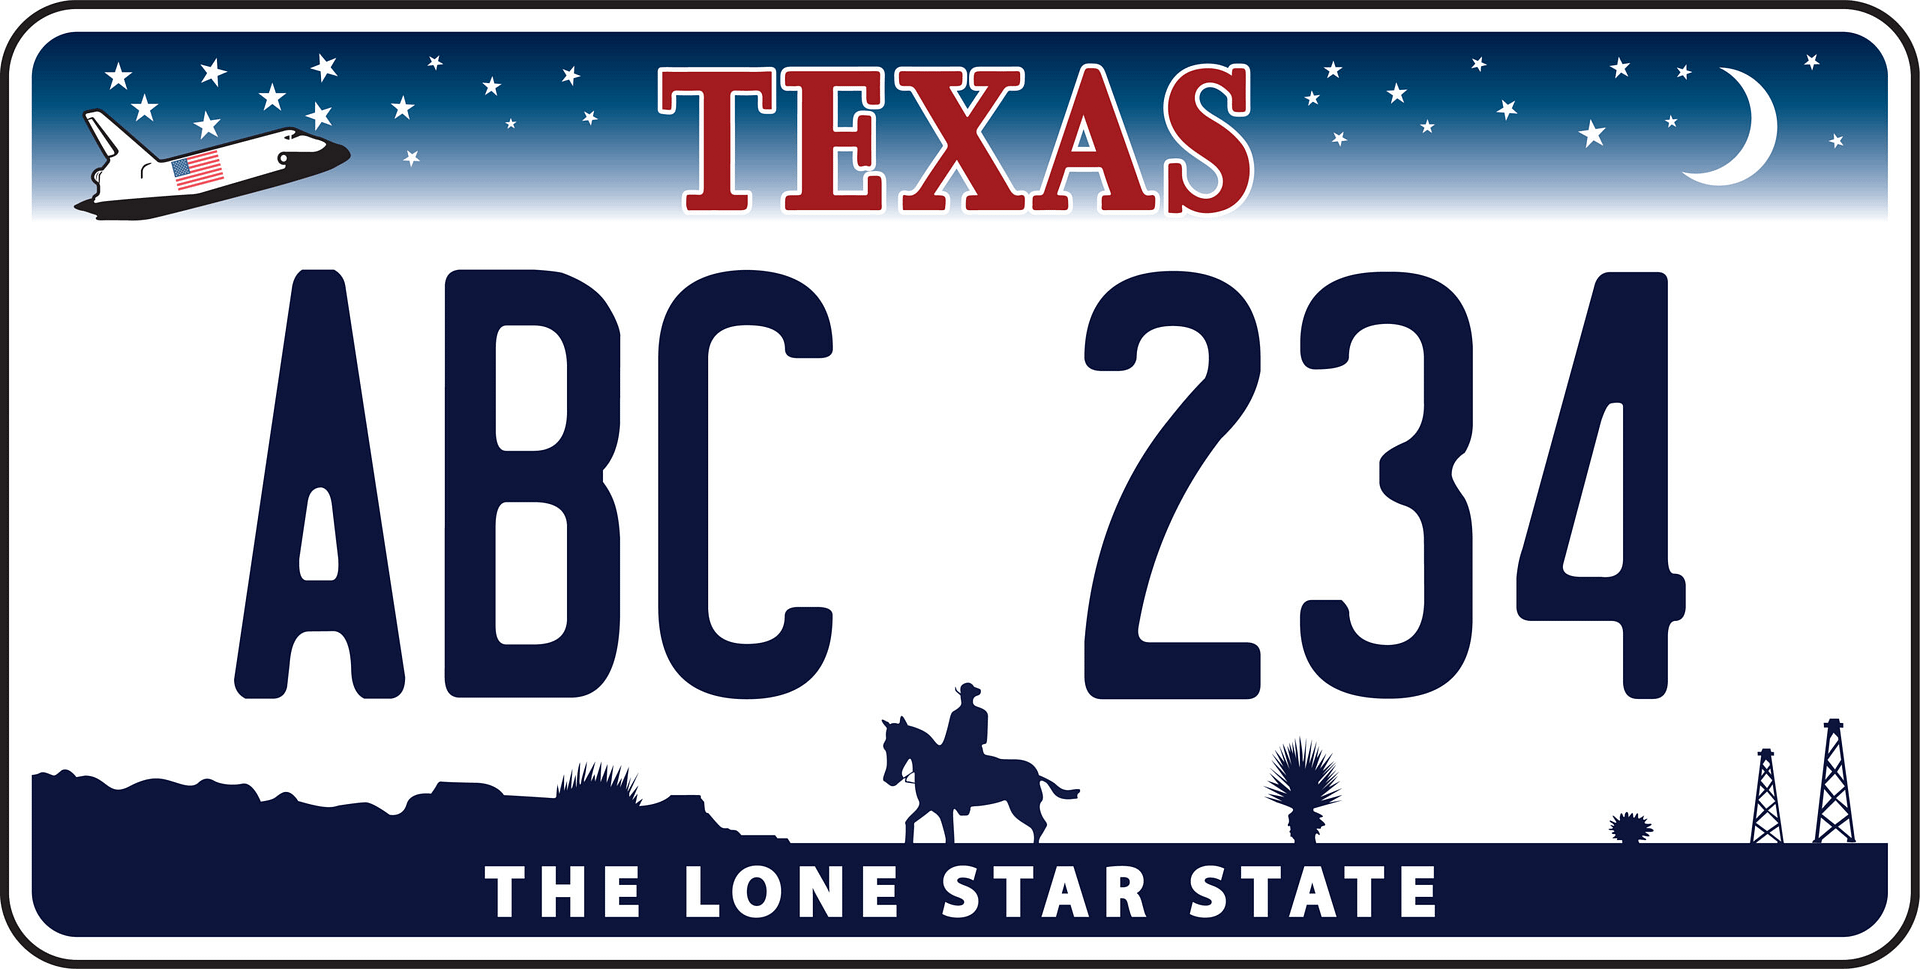 You can get this Texas license plate again (fortunately, you don't have to)